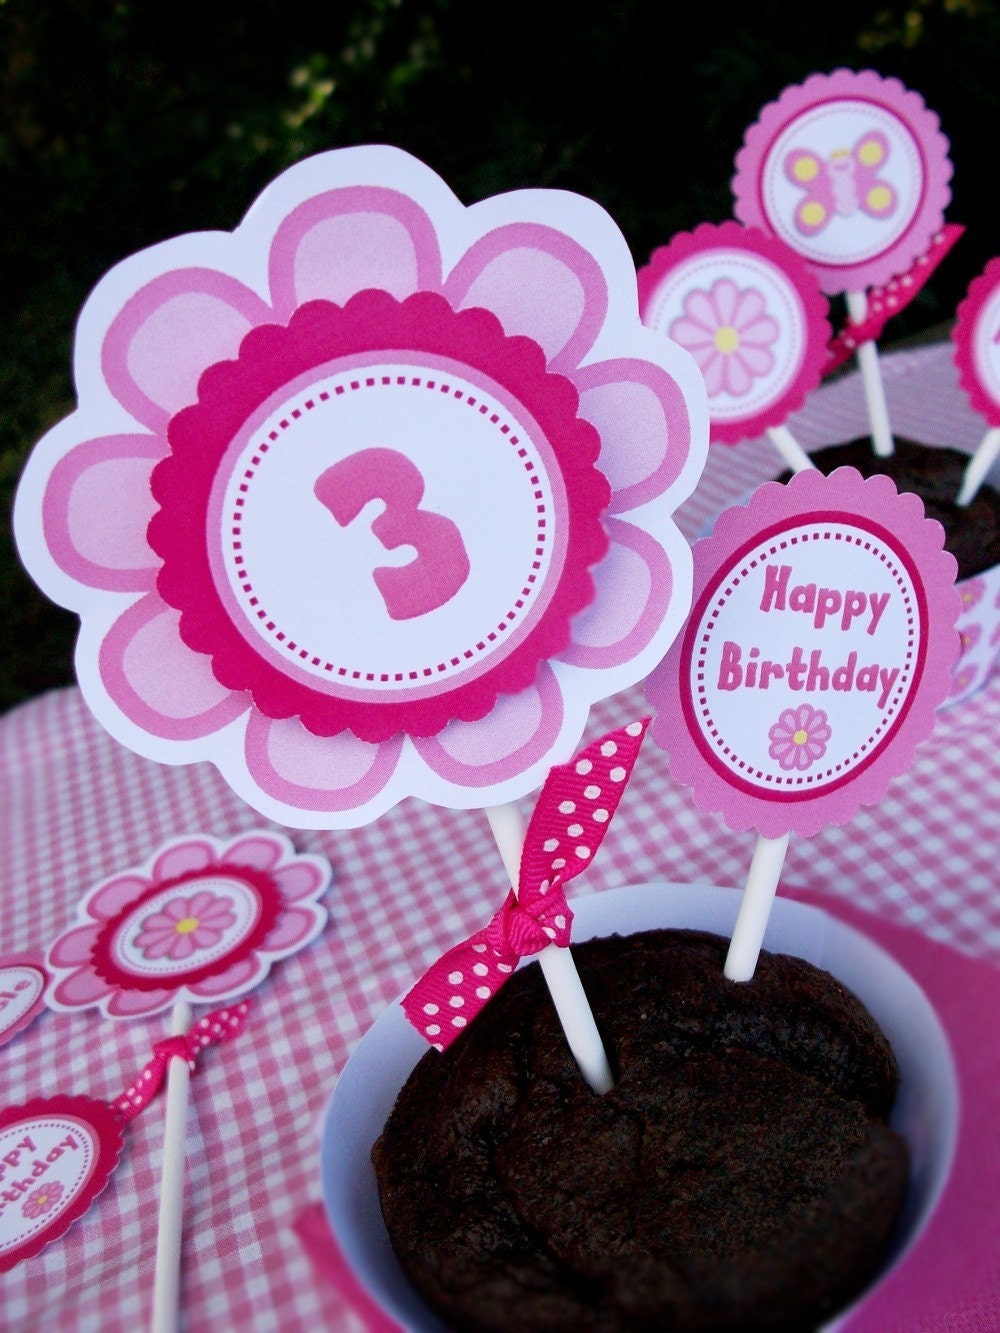 Custom Pink Garden Party Supplies - Personalized with NAME and AGE - Pink Garden Butterfly Party Collection